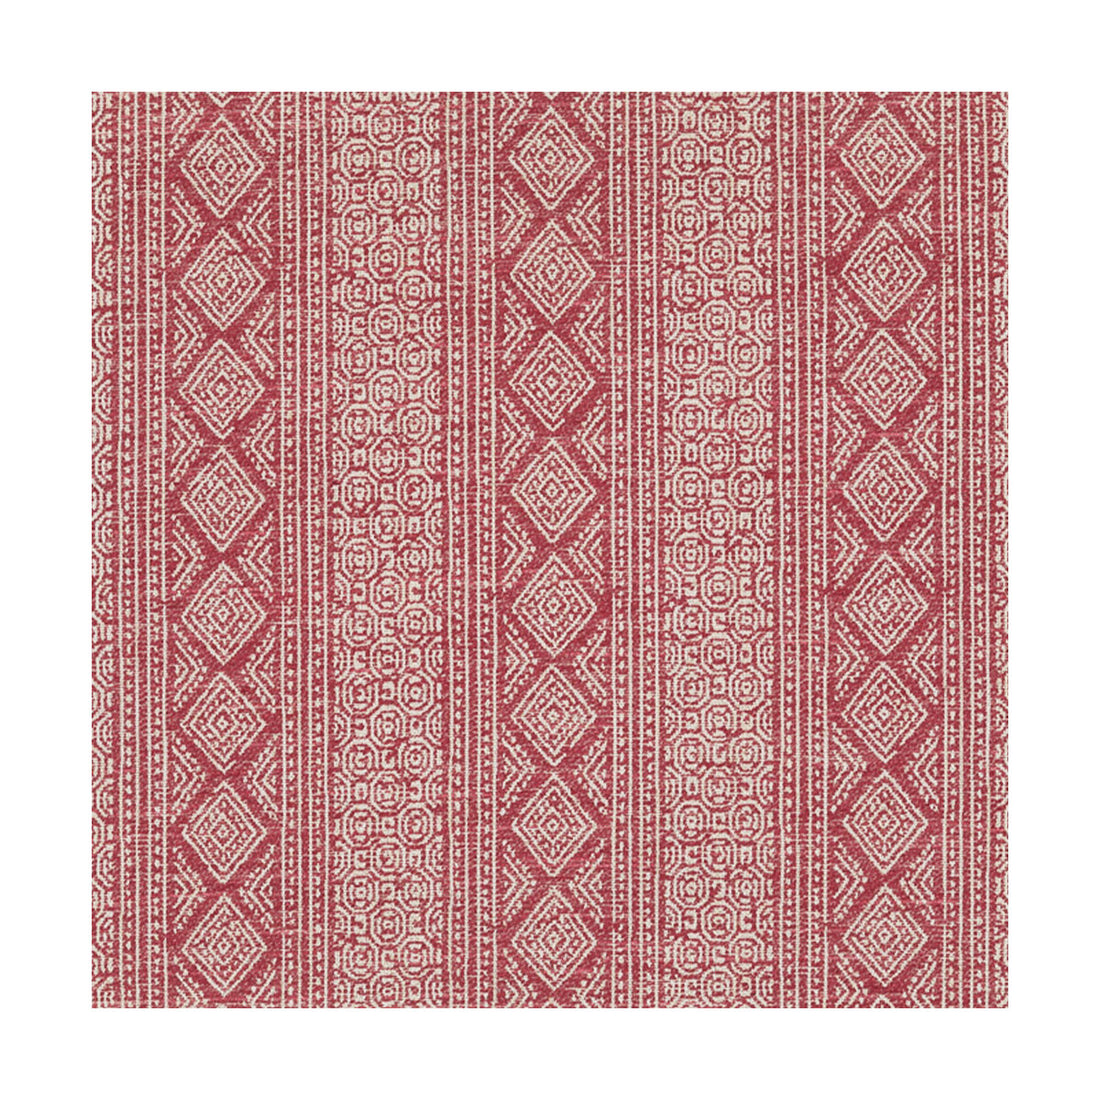 Jasper fabric in raspberry color - pattern BFC-3701.197.0 - by Lee Jofa in the Blithfield collection